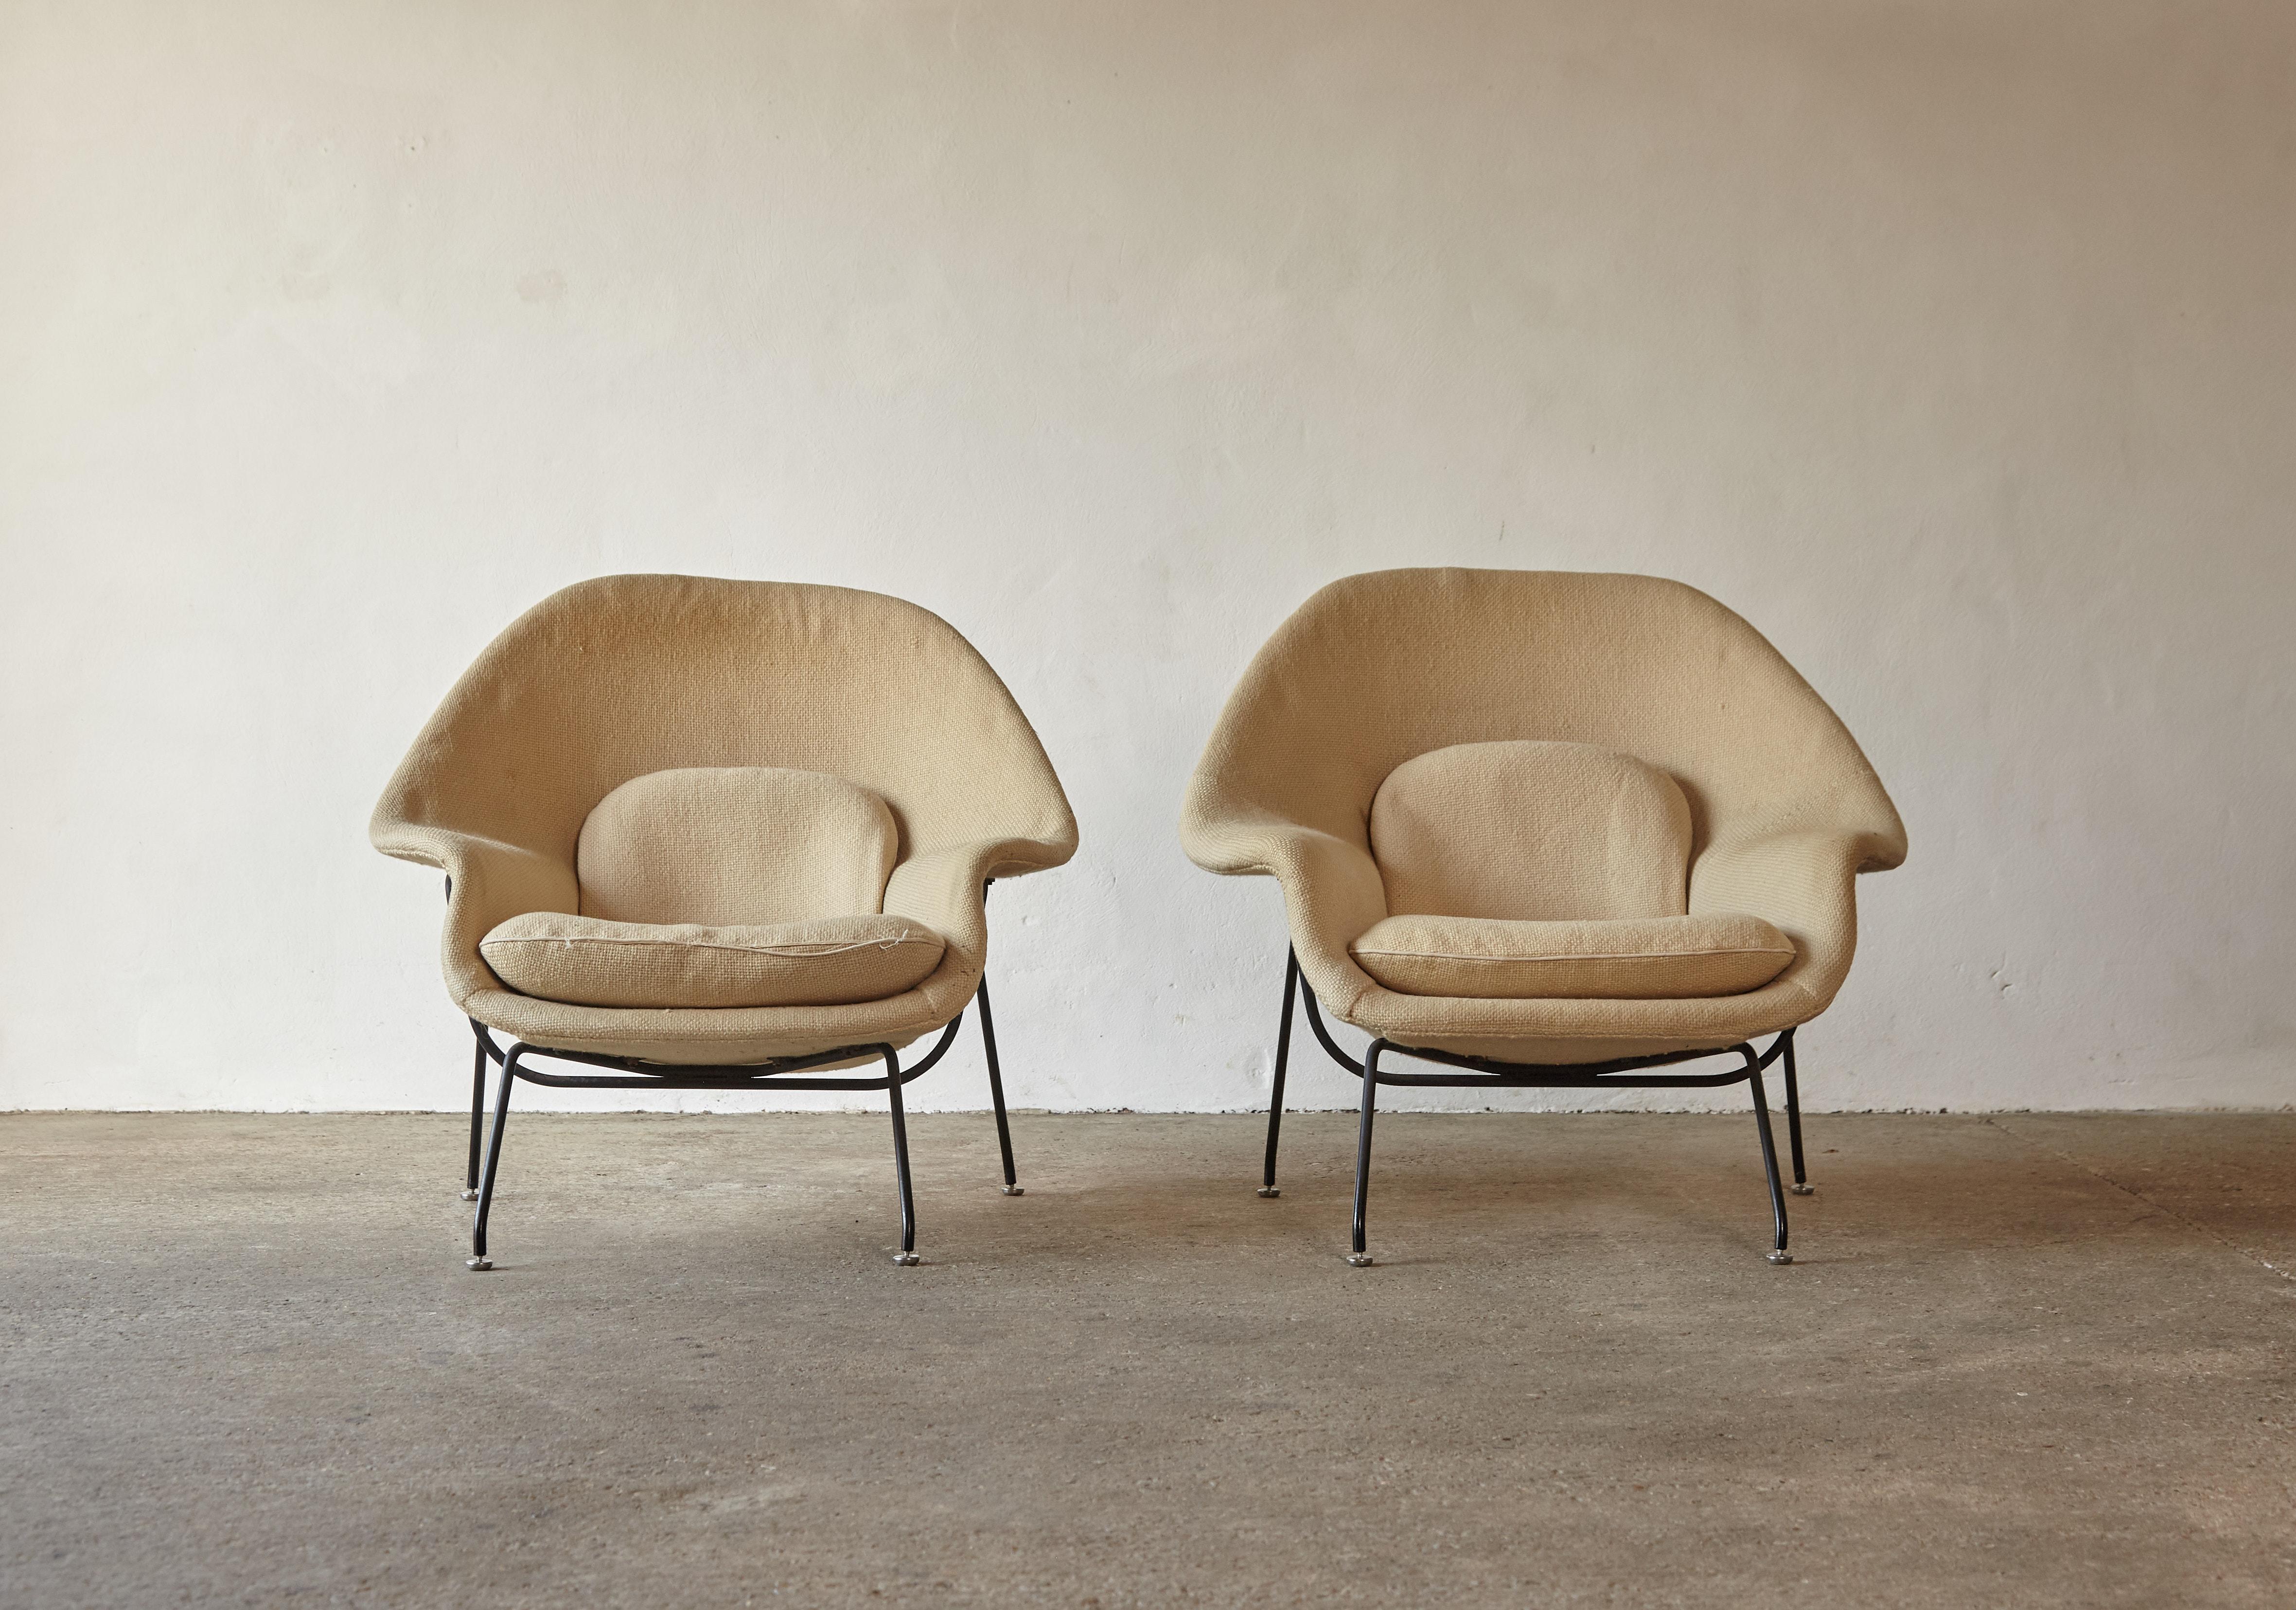 Rare Early Pair of Eero Saarinen Womb Chairs and Ottomans, Knoll, USA, 1950s For Sale 2